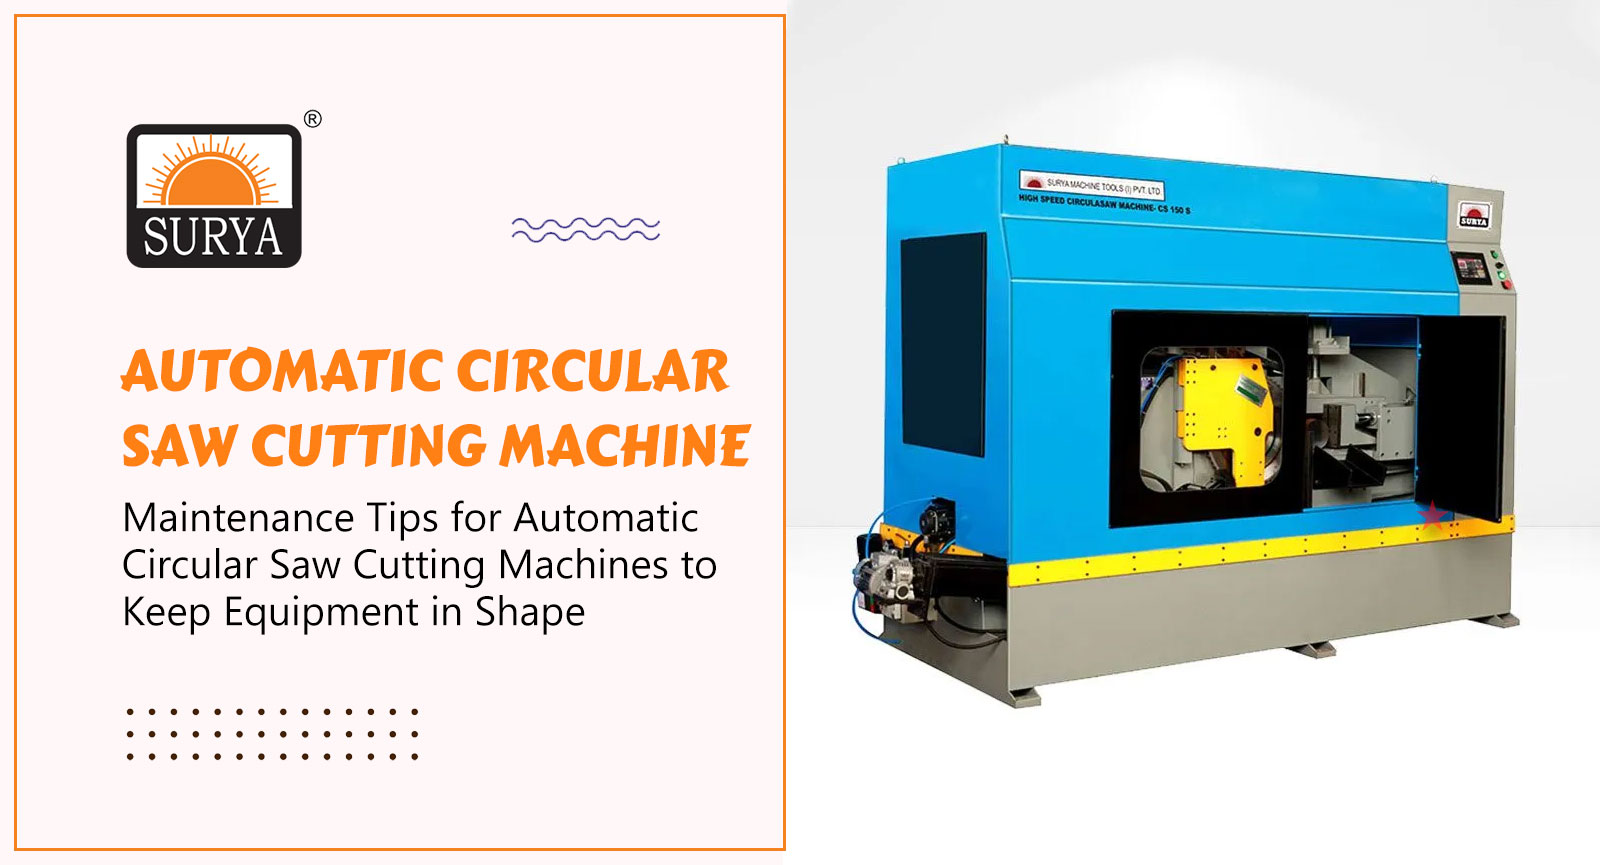 Maintenance Tips for Automatic Circular Saw Cutting Machines to Keep Equipment in Shape